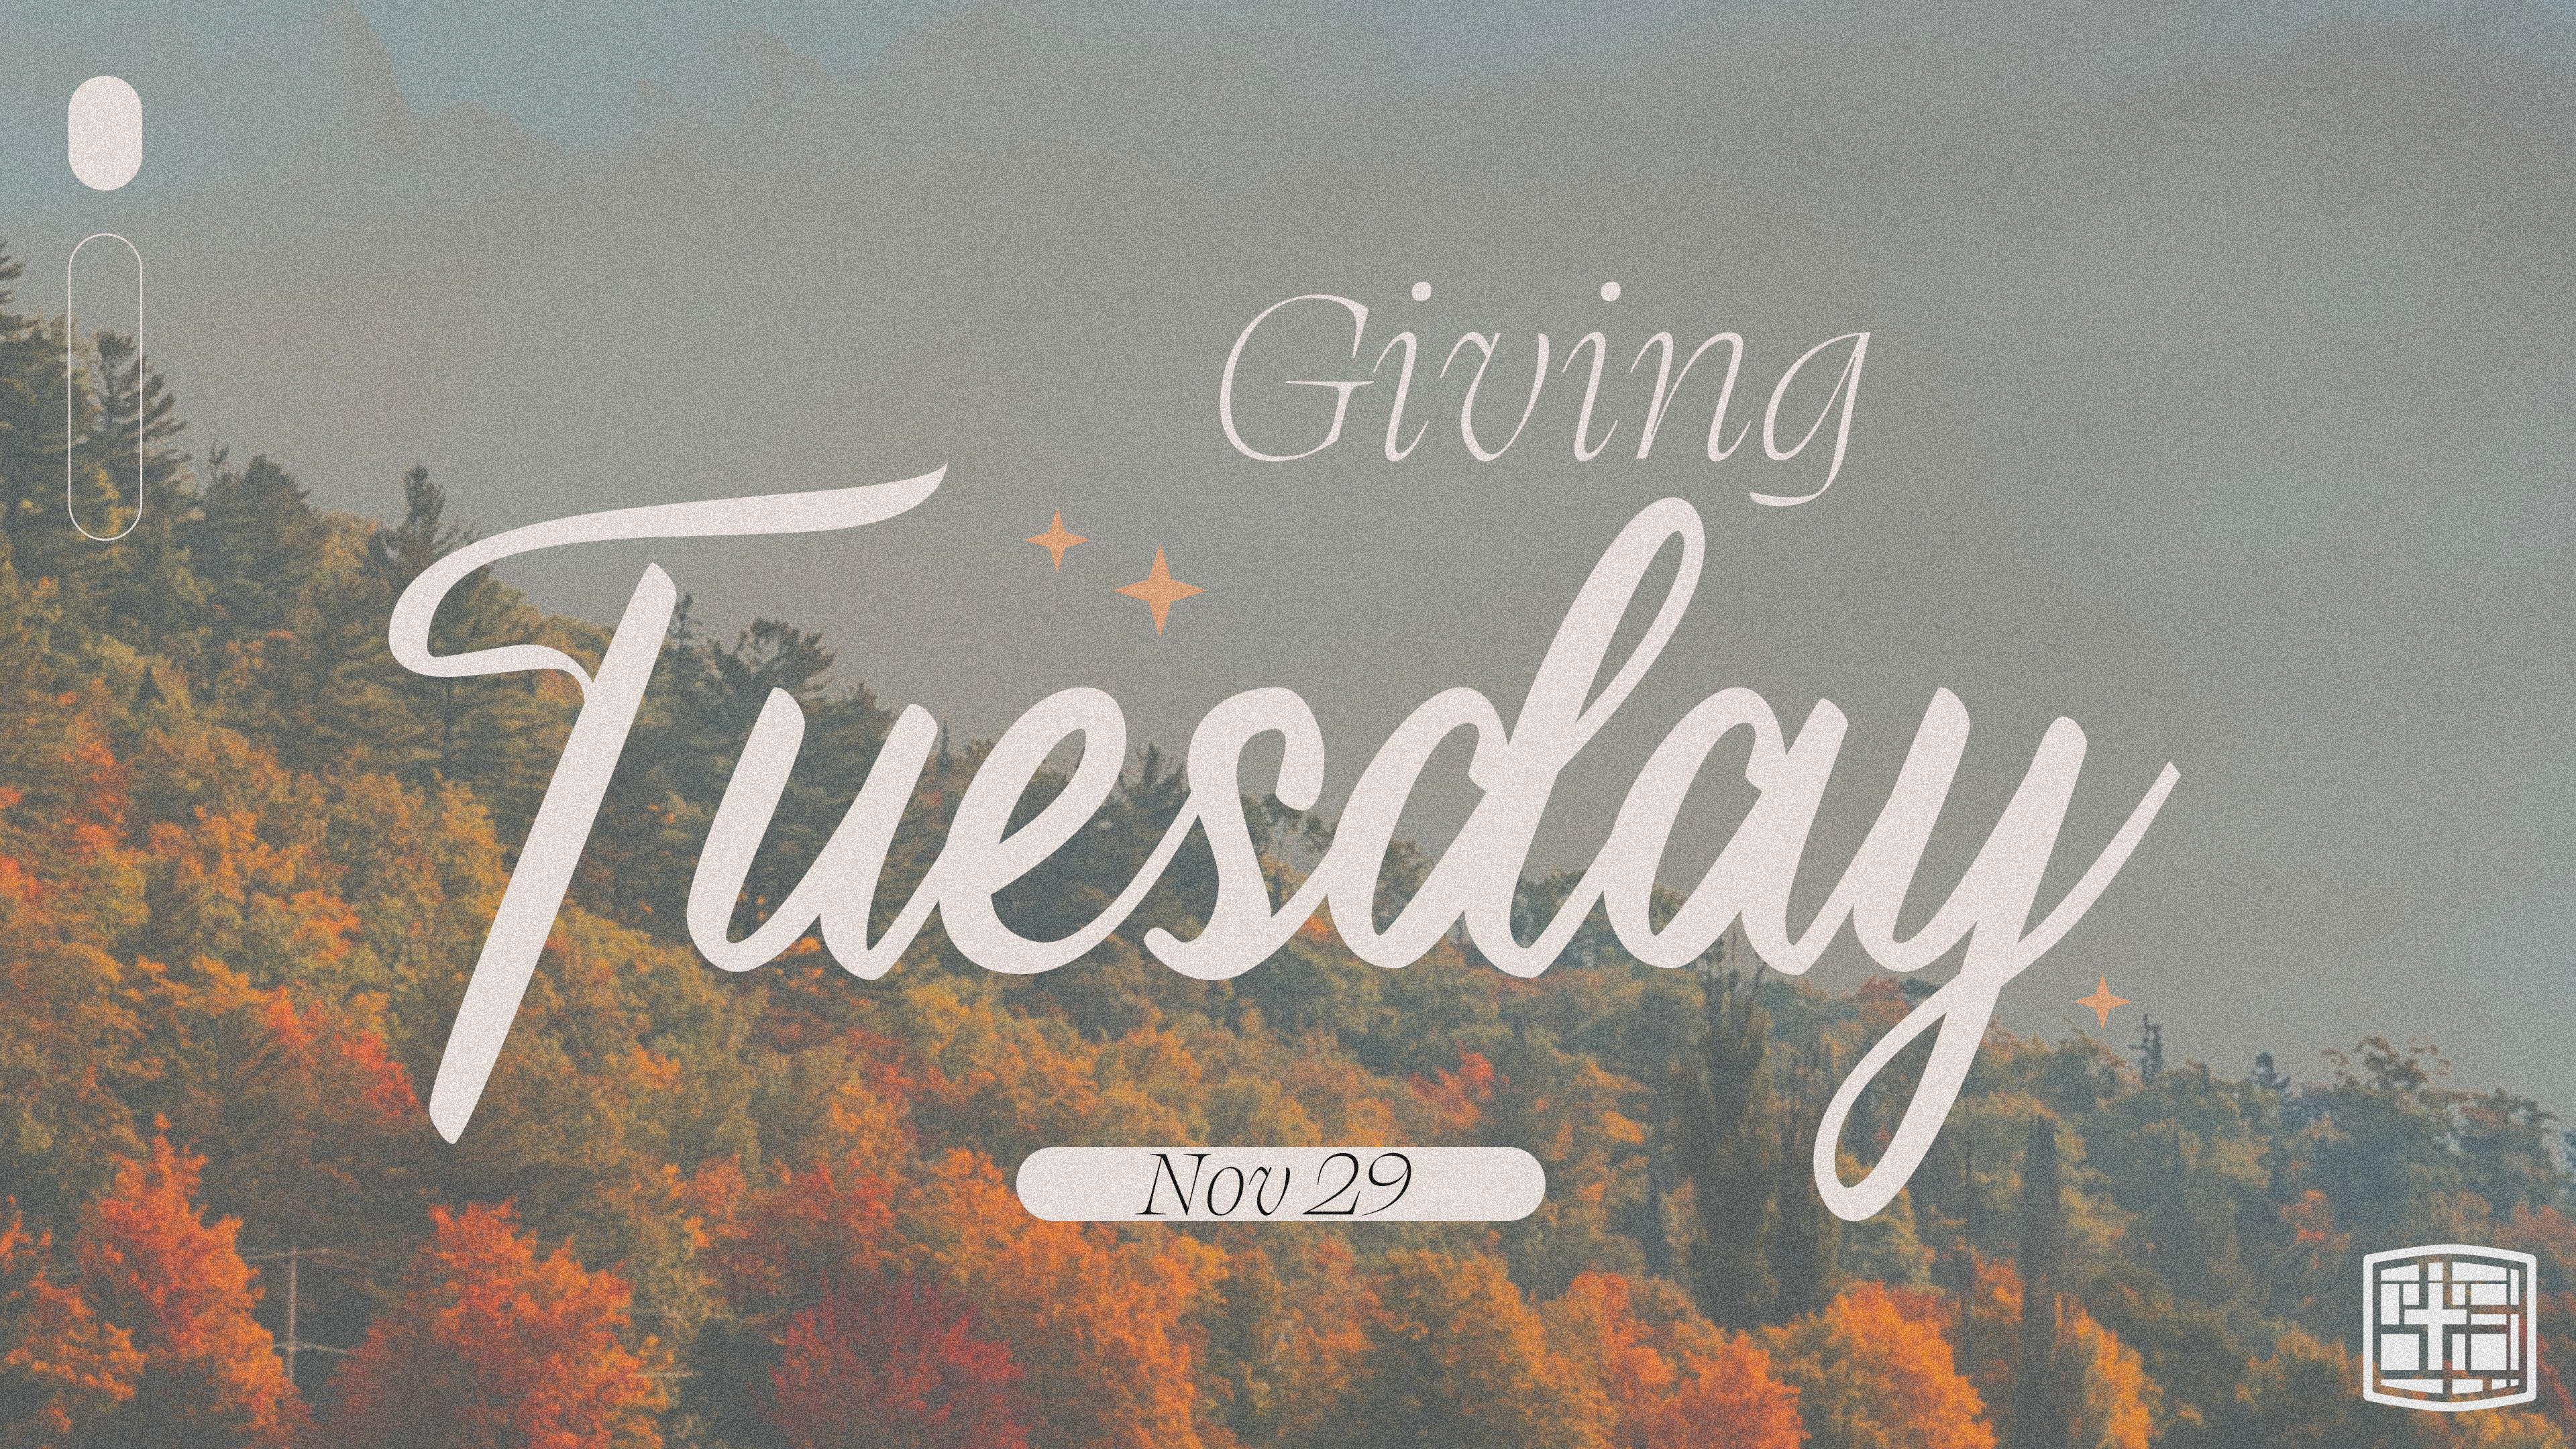 Giving Tuesday image